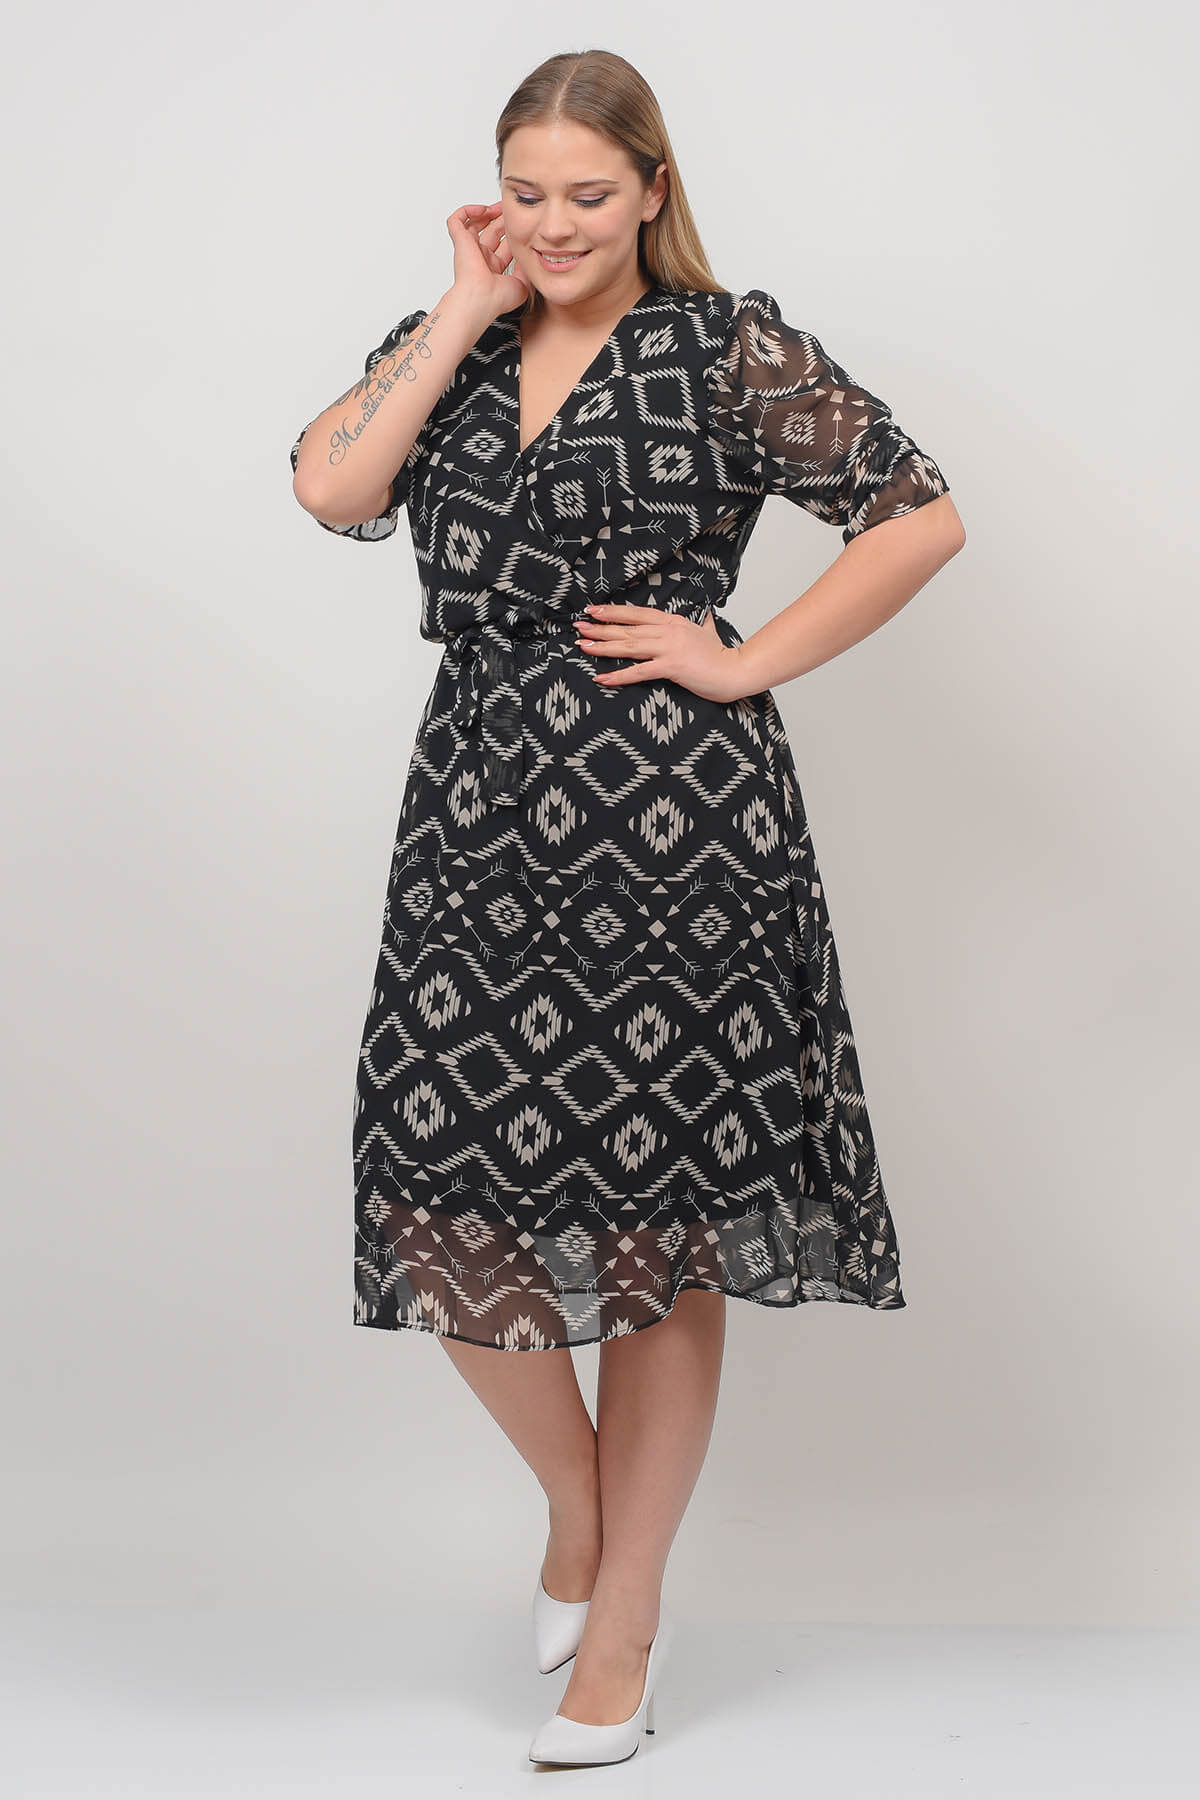 A model wears 40178 - Double Breasted Neck Midi Plus Size Patterned Chiffon Dress, wholesale Dress of Mode Roy to display at Lonca